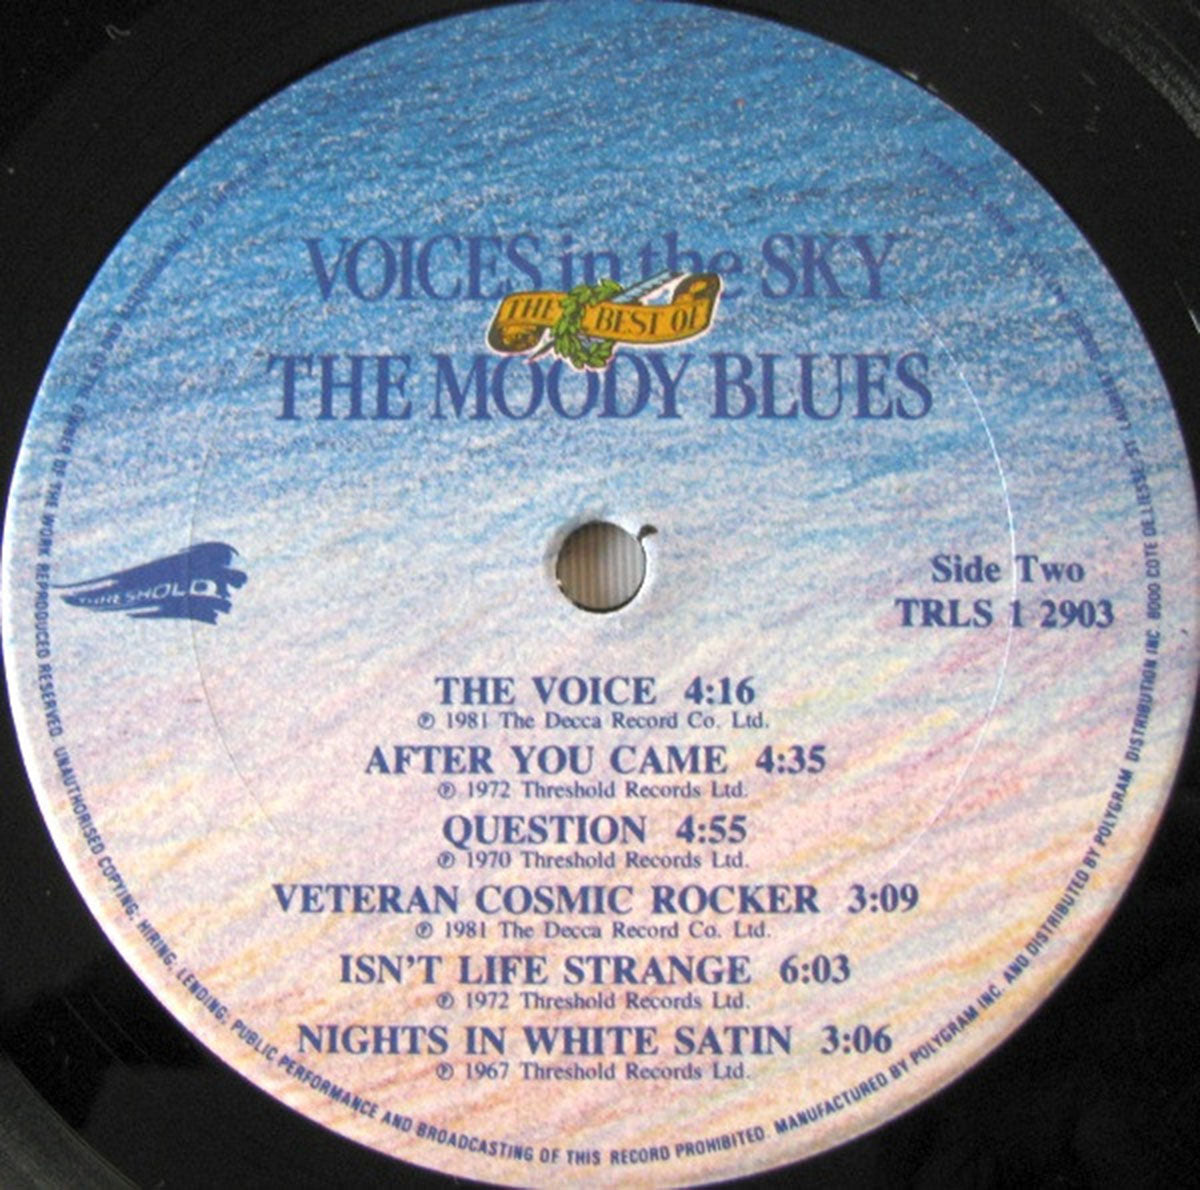 The Moody Blues – Voices In The Sky (The Best Of The Moody Blues) - 1984